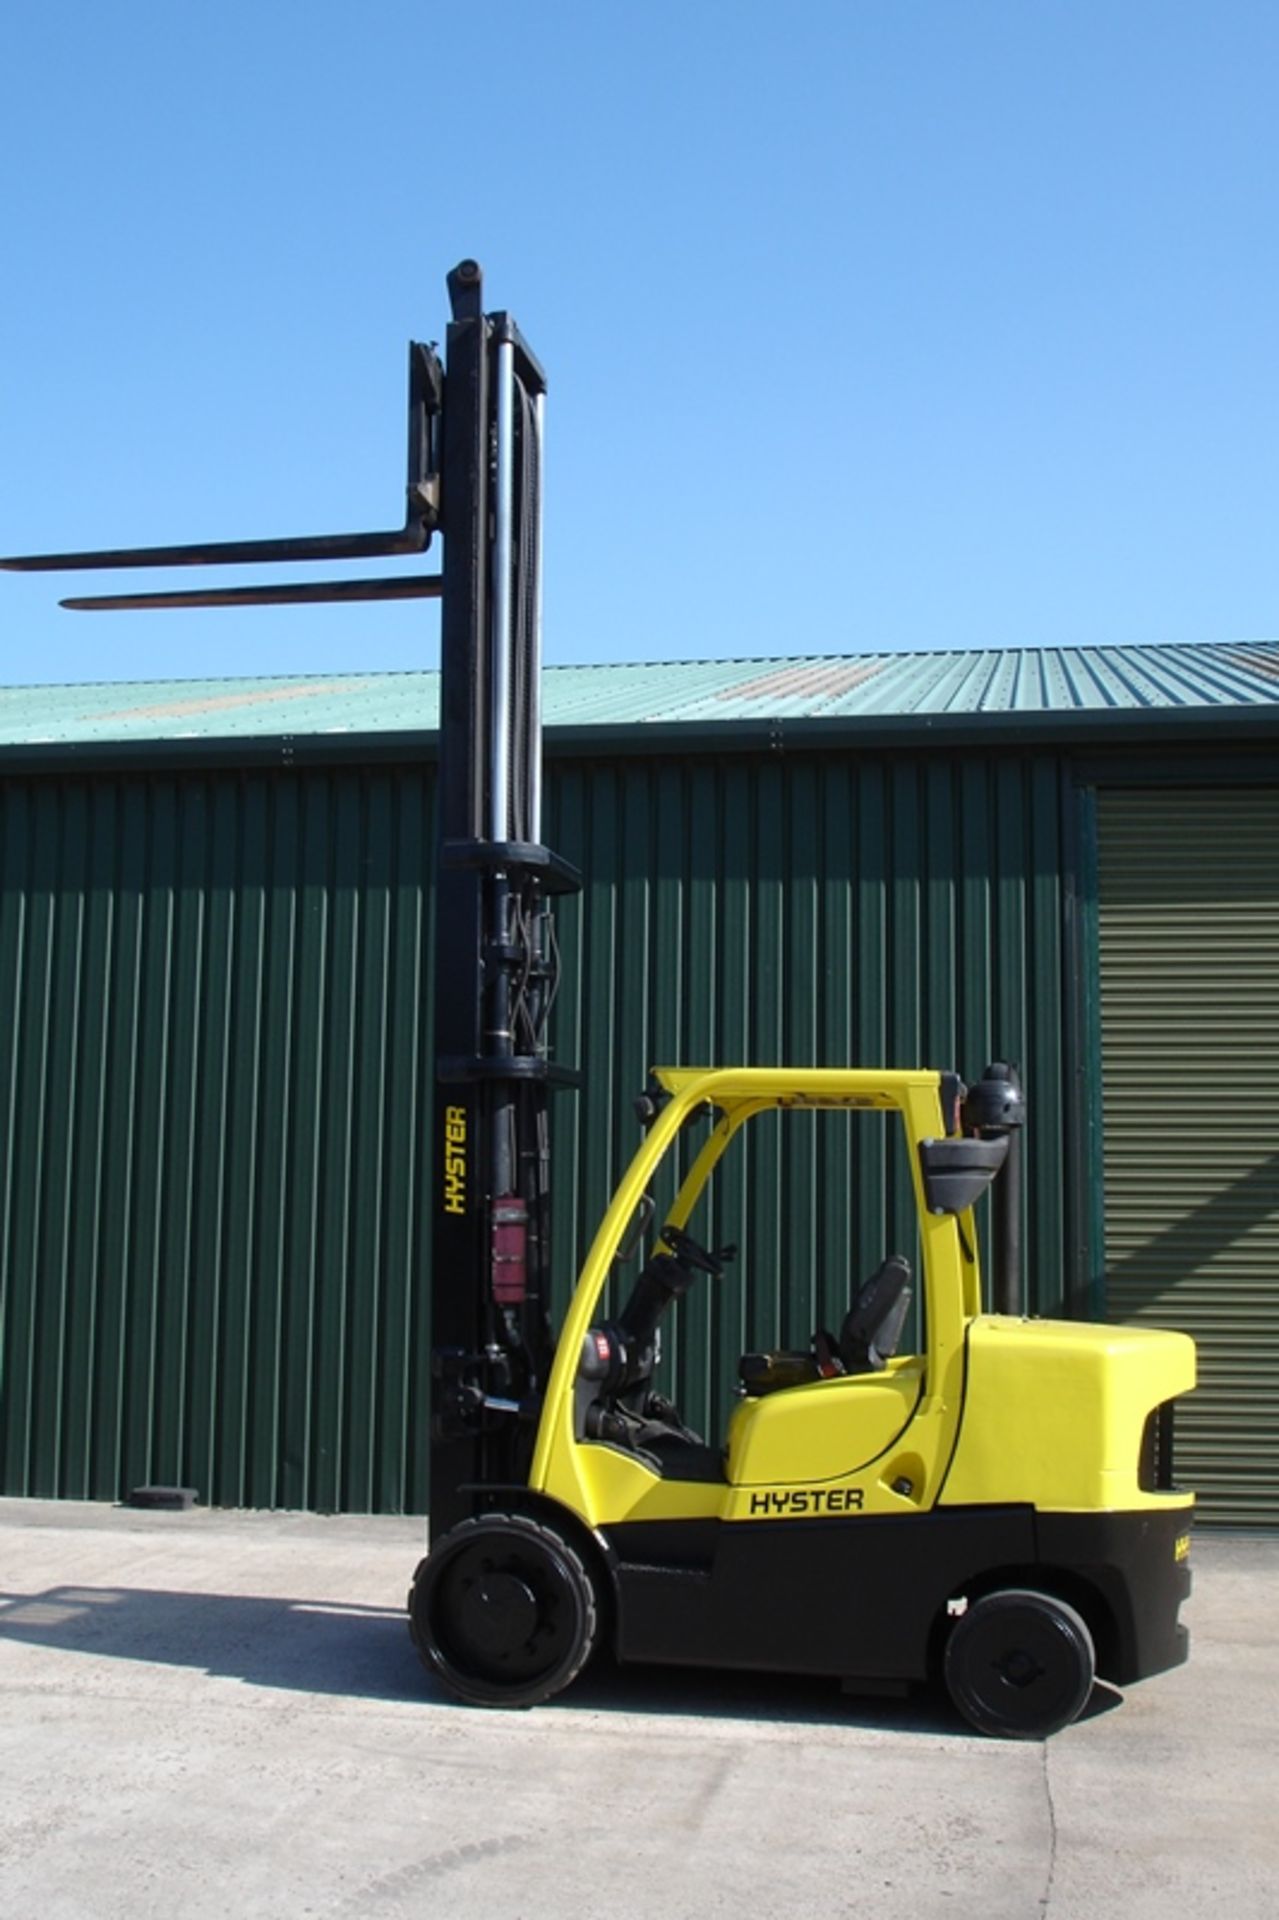 HYSTER COMPACT 7 TON FORKLIFT (2009) - Image 6 of 6